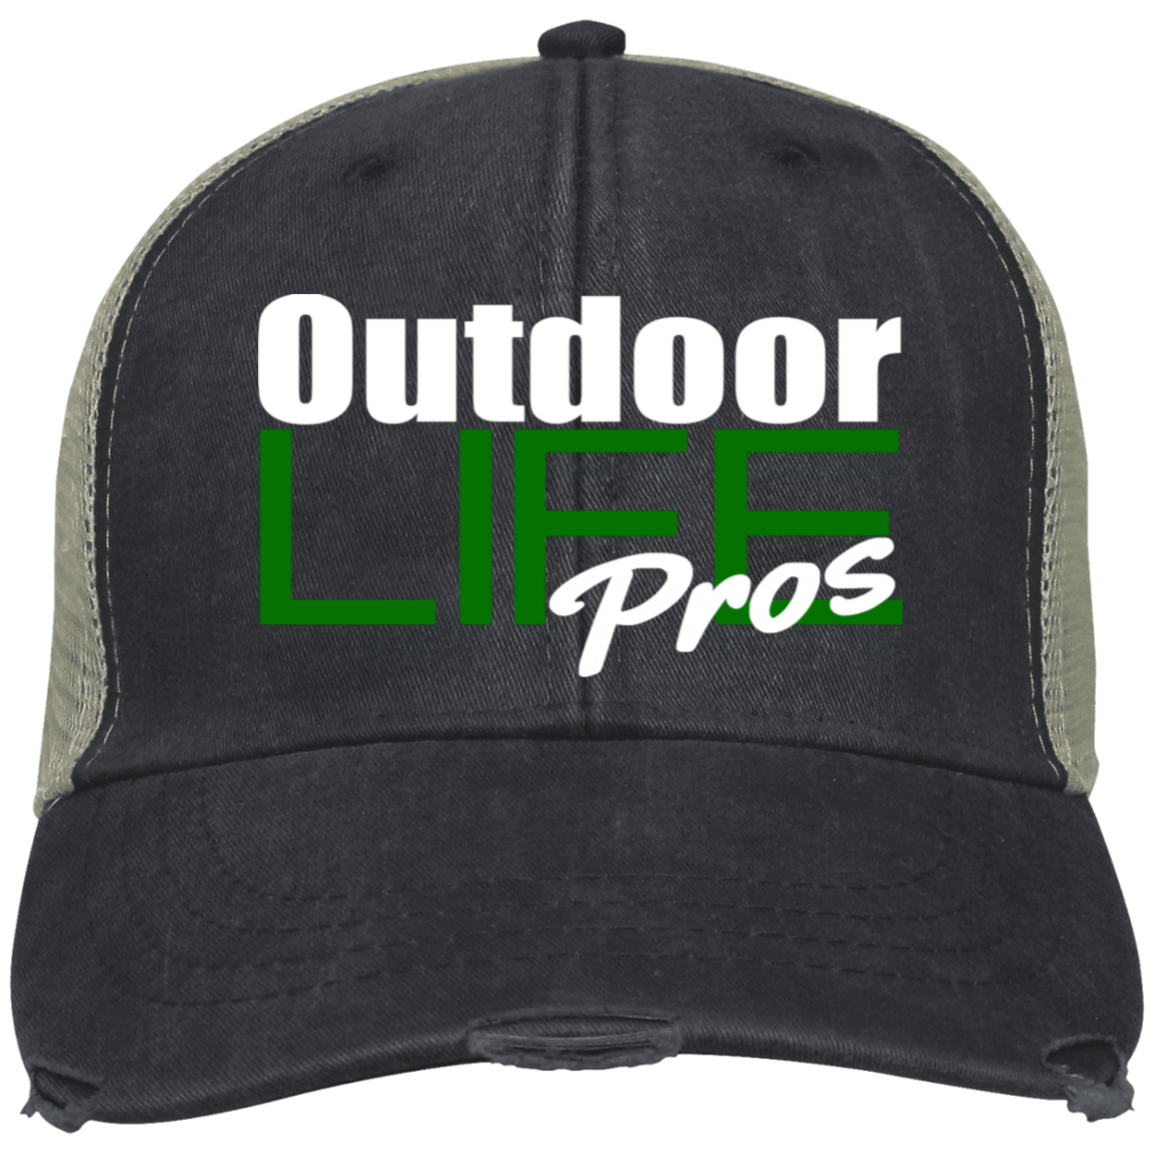 OUTDOOR LIFE OL102 Embroidered Ollie Cap